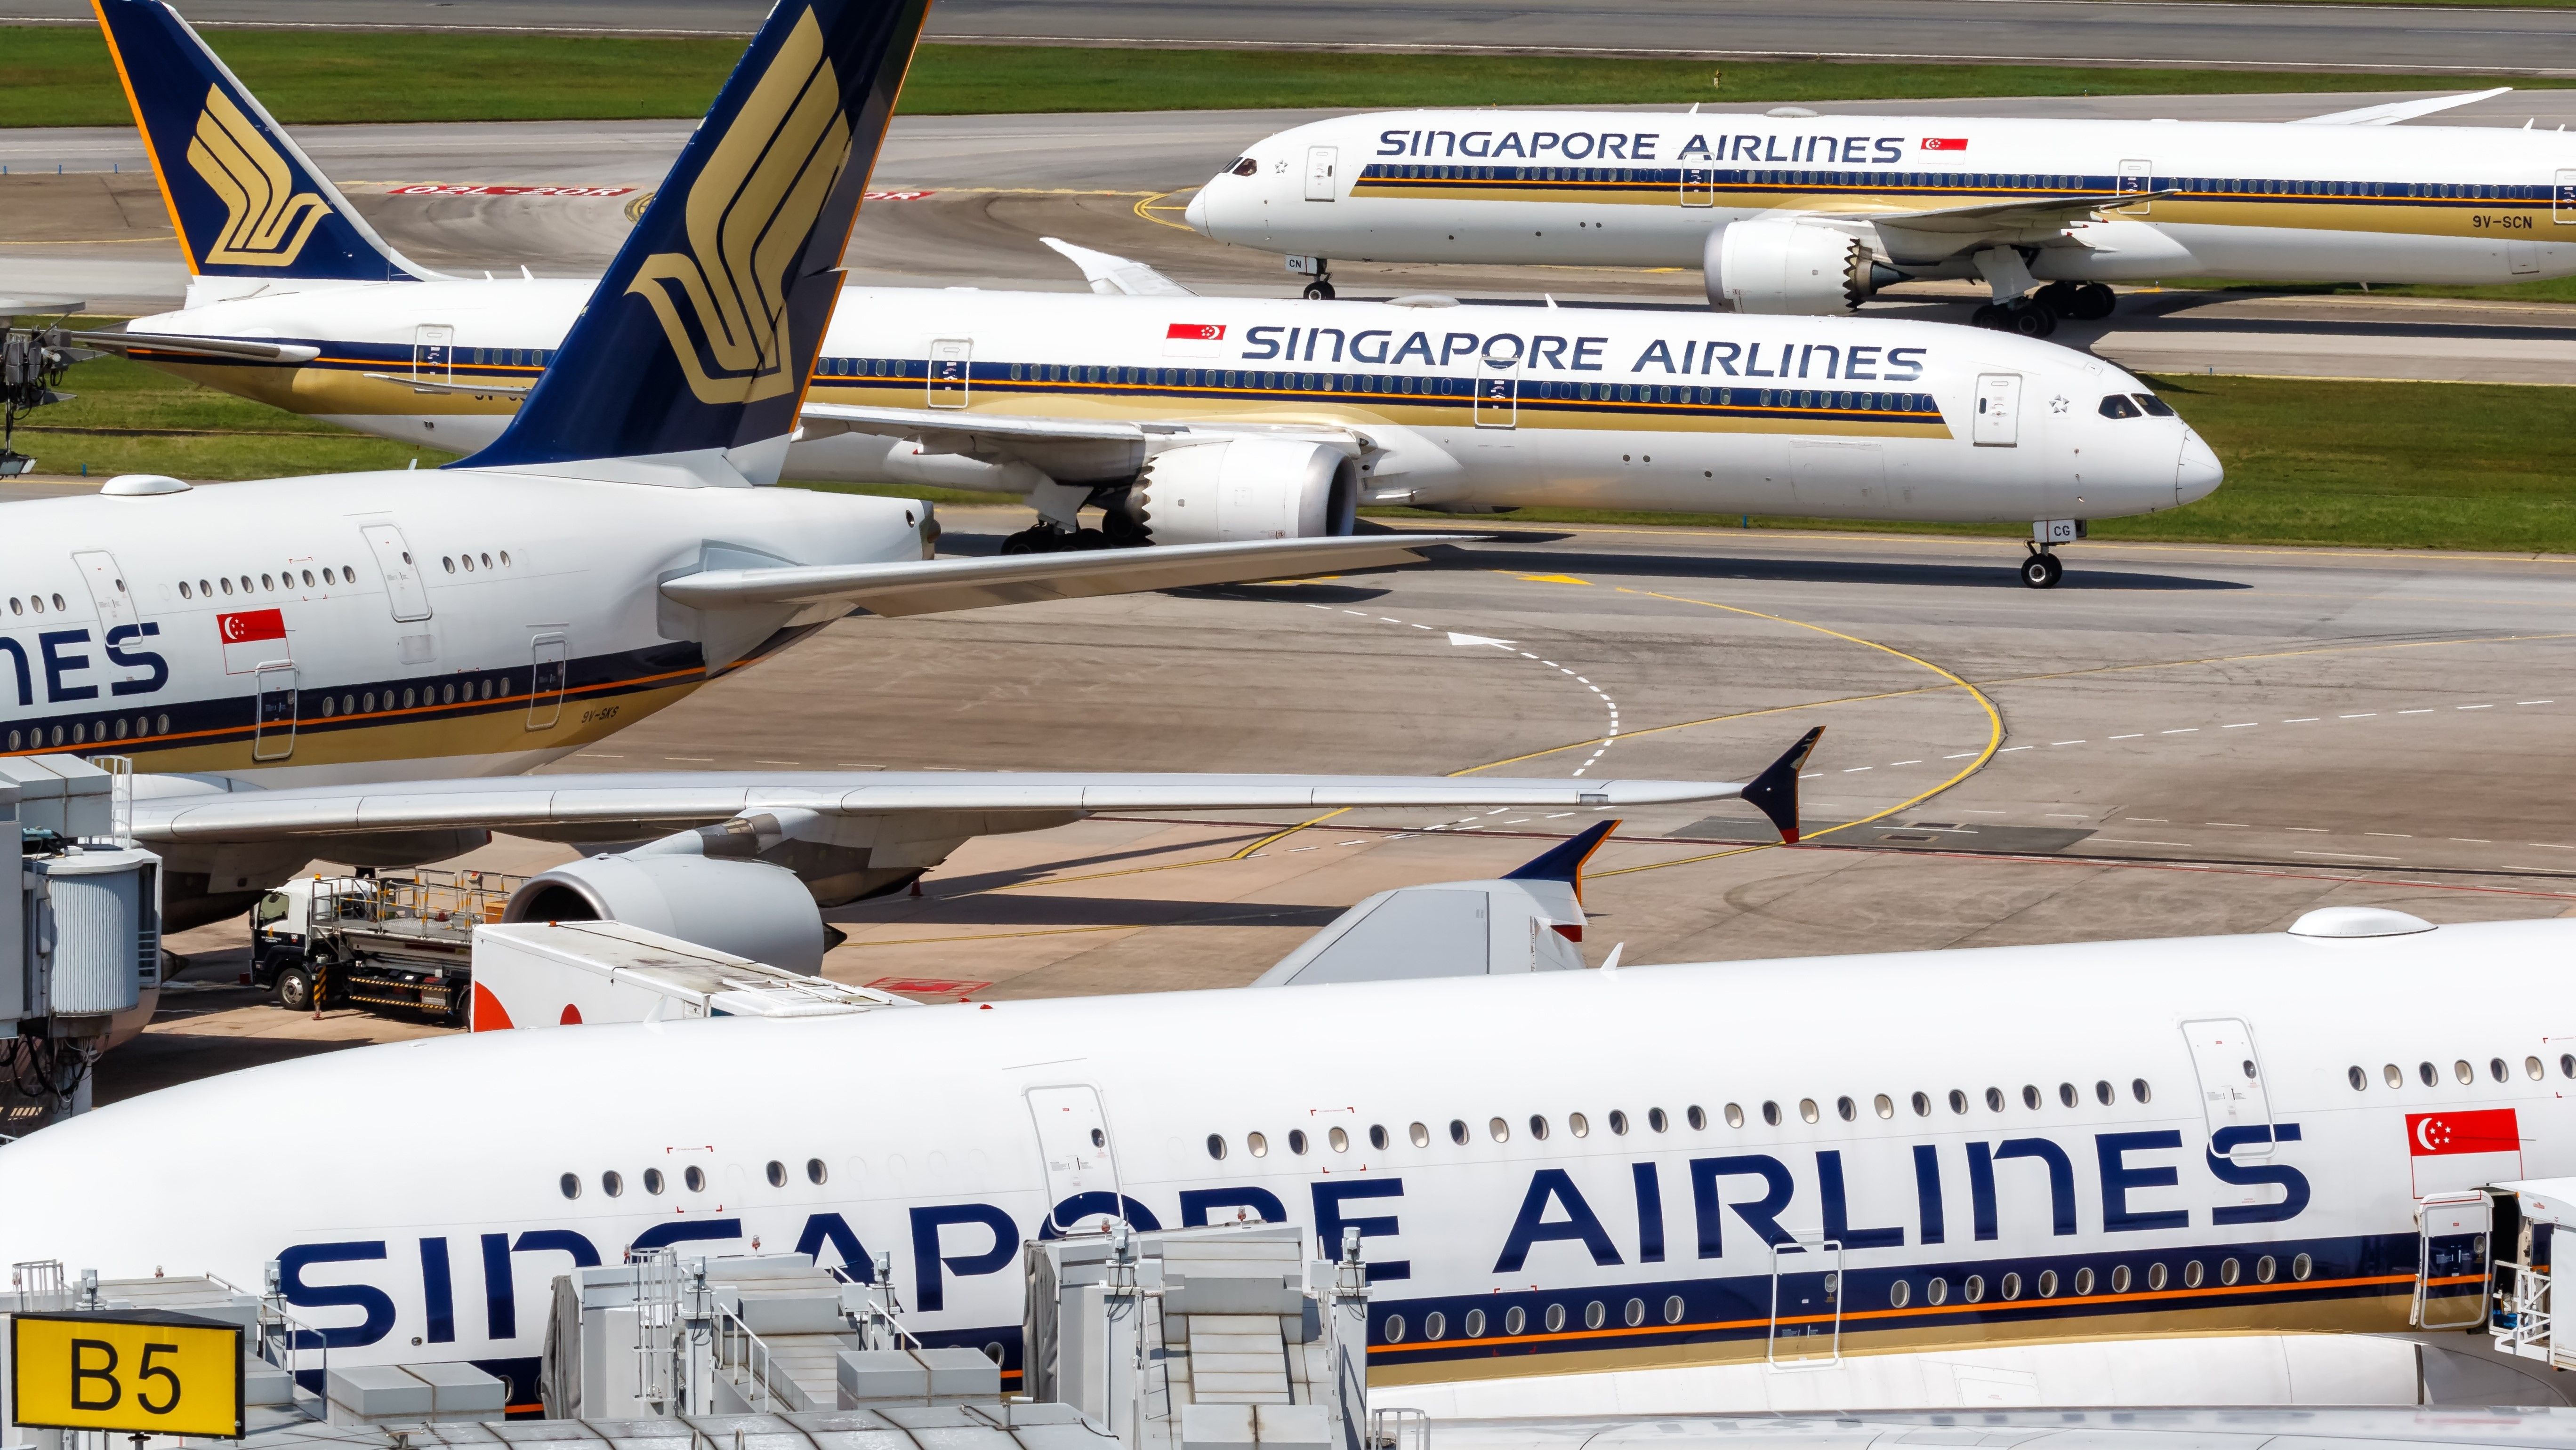 Singapore Airlines planes at Changi Airport